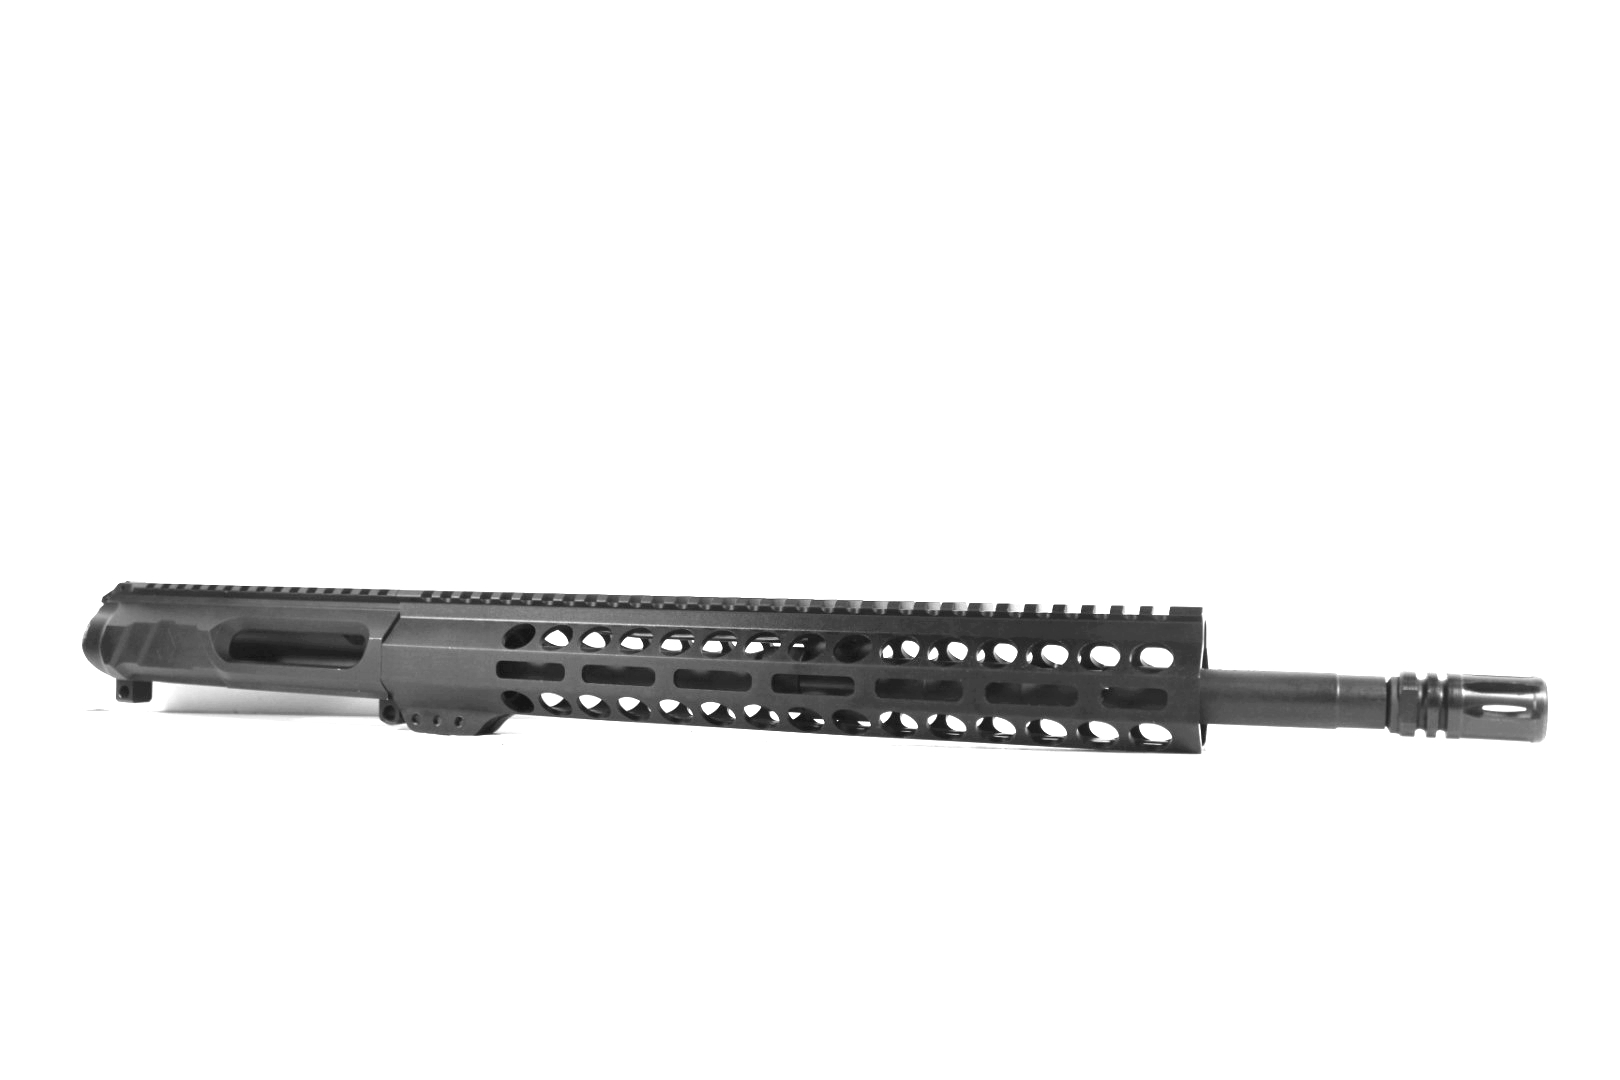 16 inch AR-15 Non Reciprocating Side Charging 7.62x39 Melonite M-LOK Upper